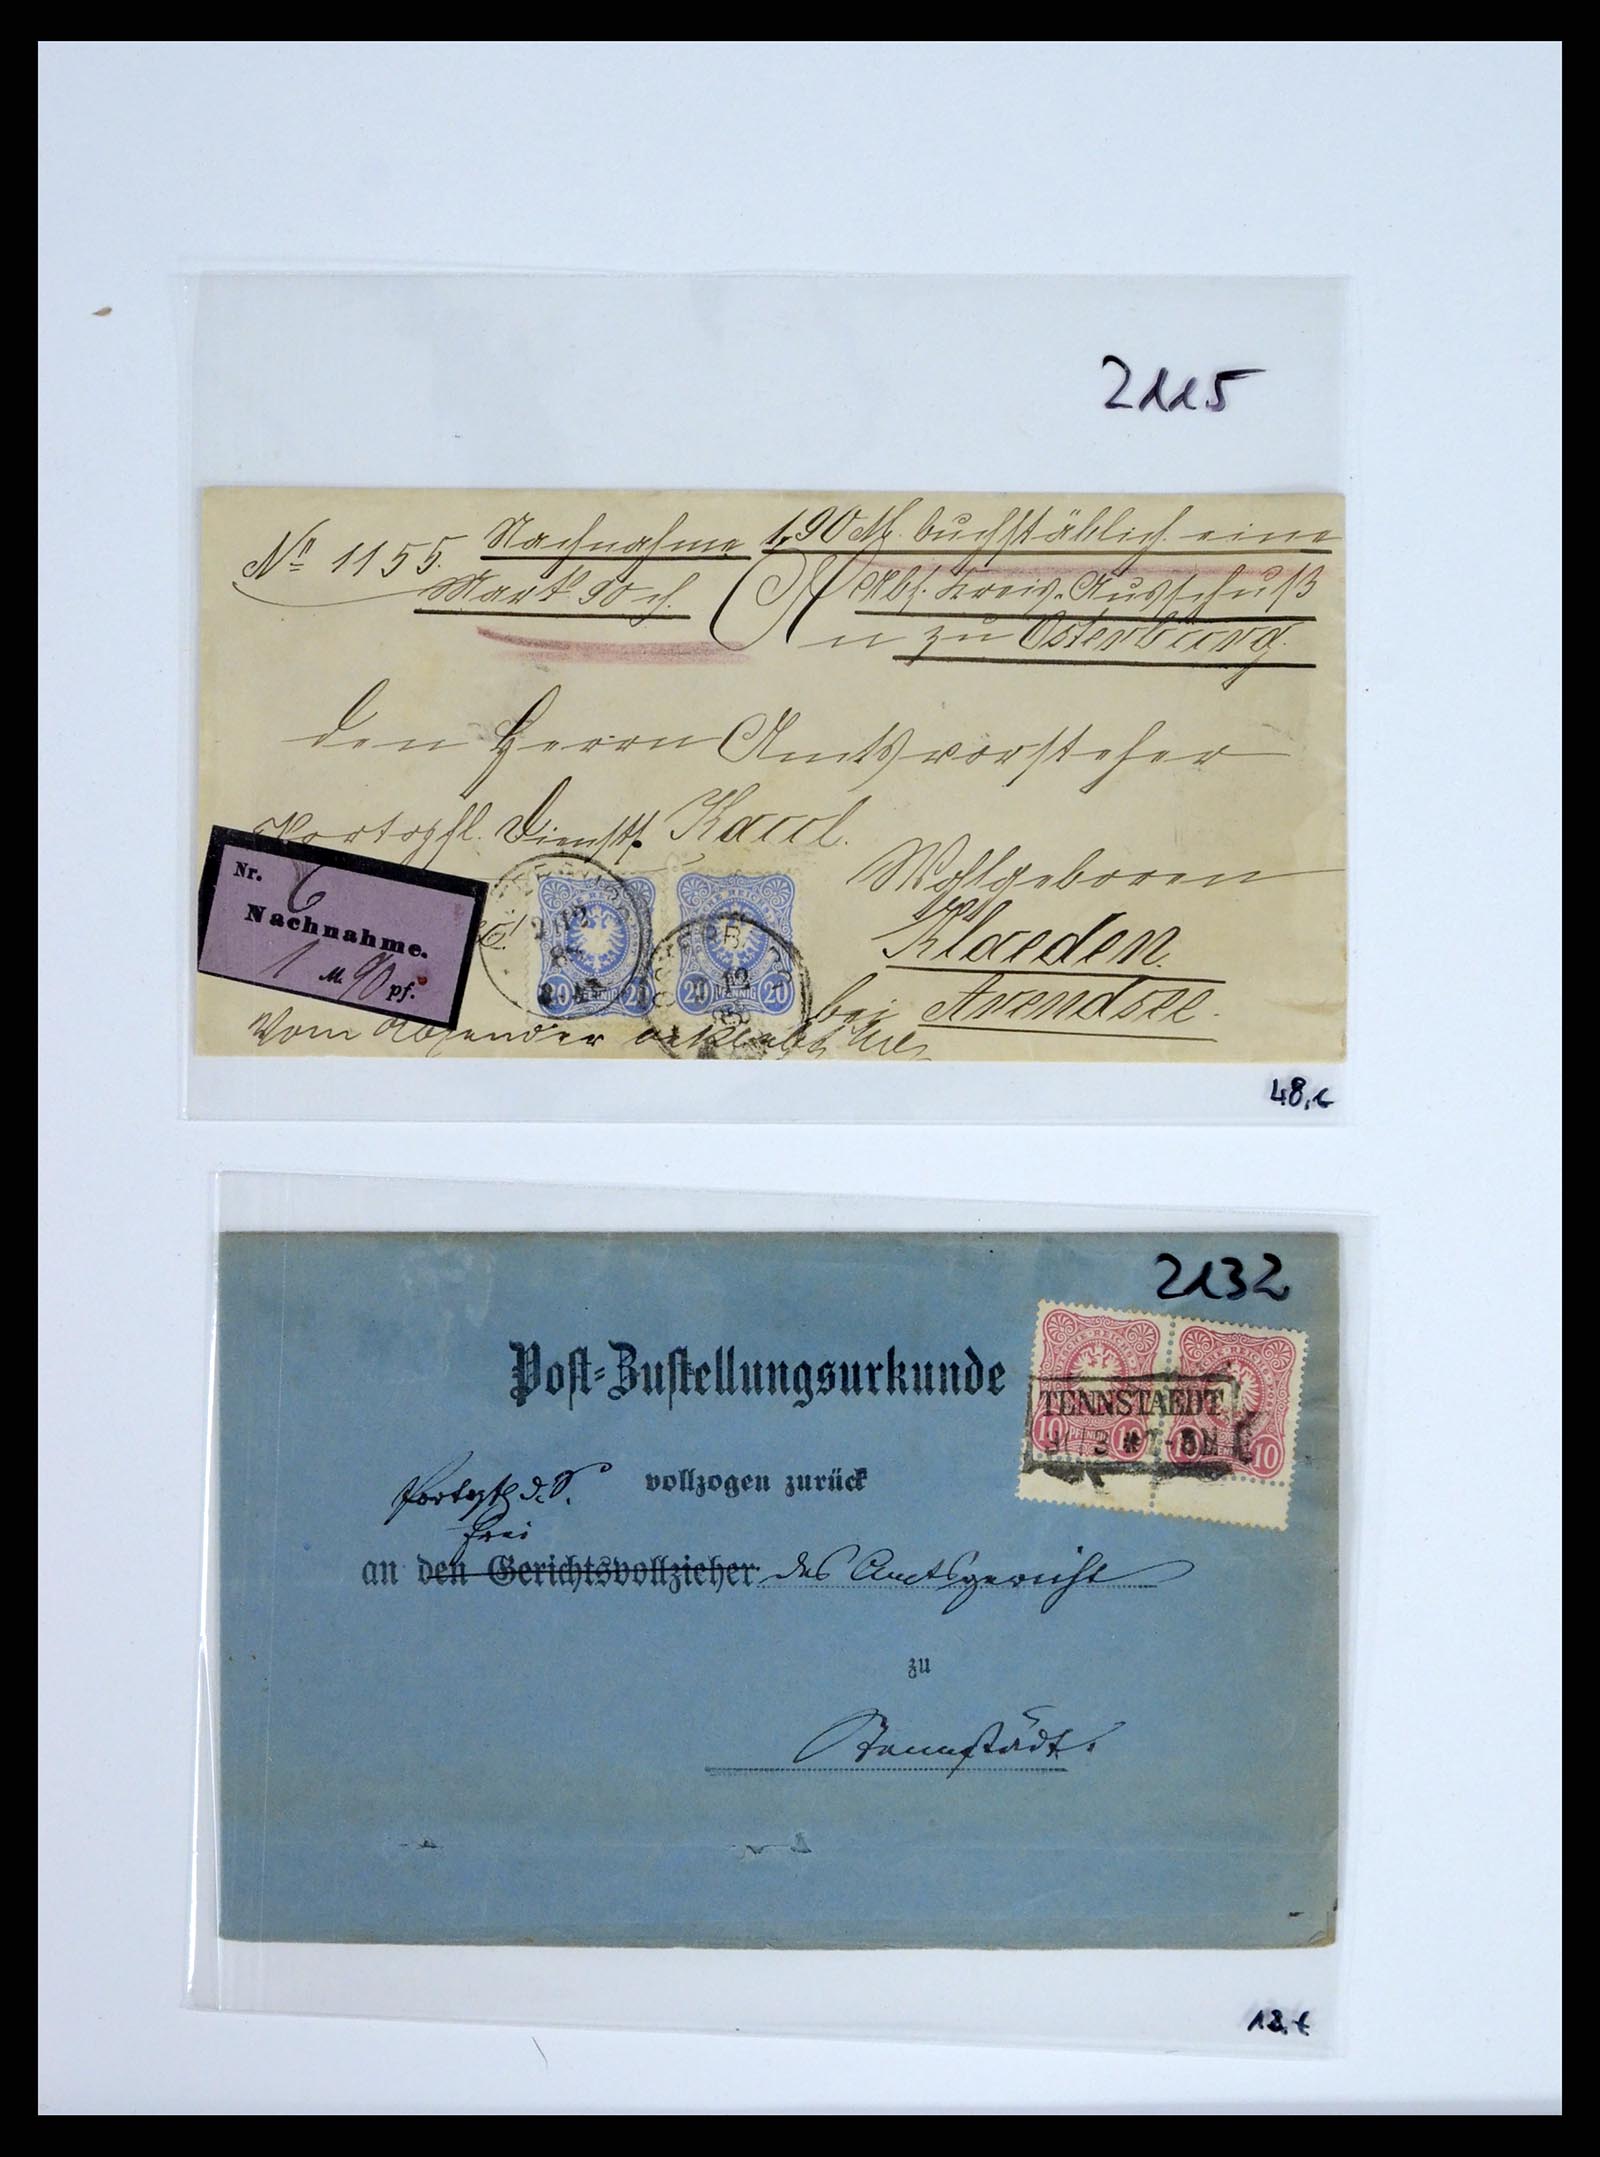 37633 010 - Stamp collection 37633 Germany covers 1870-1948.